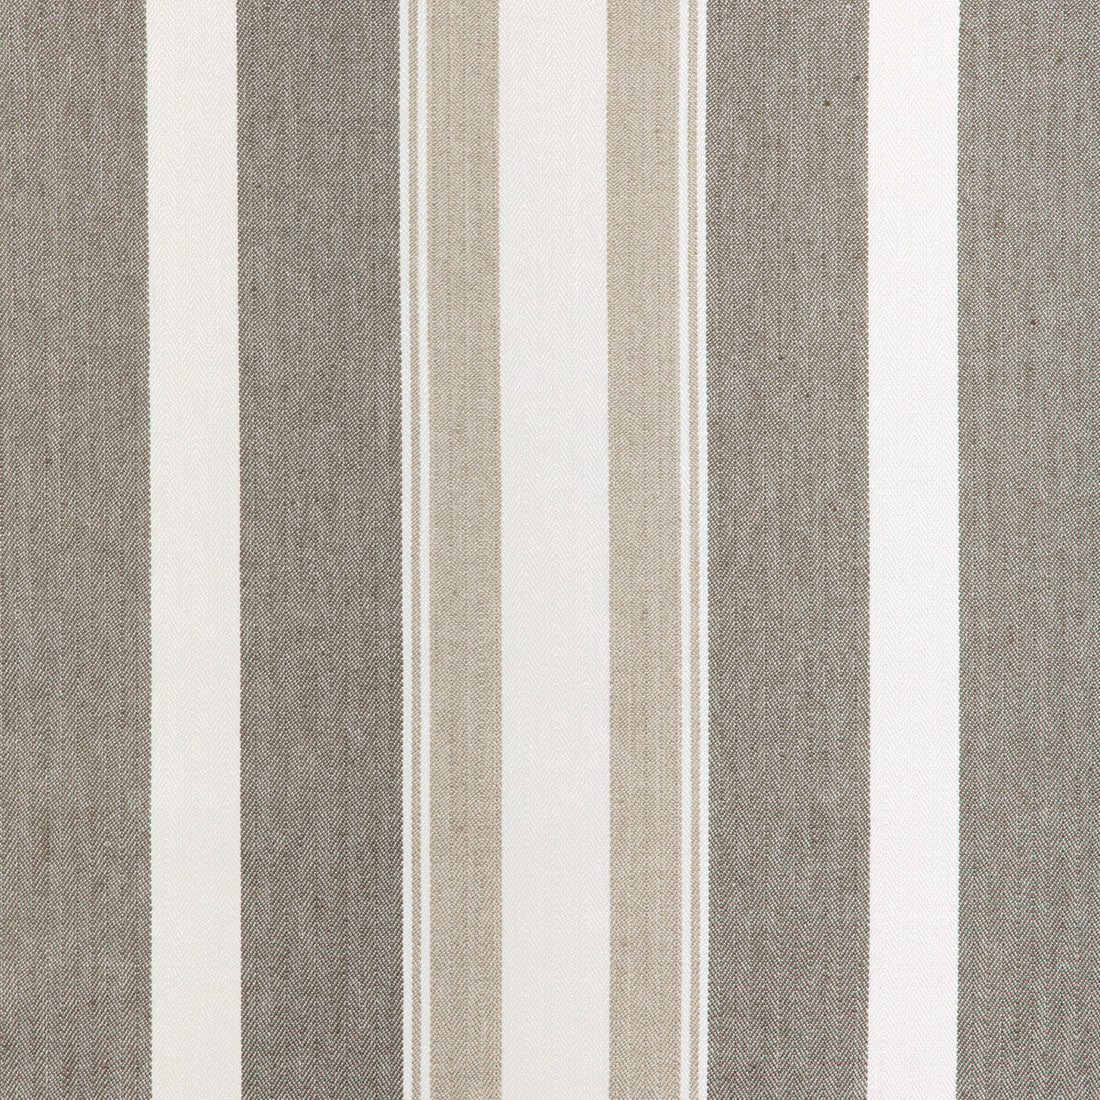 Natural Stripe fabric in barley color - pattern 36863.616.0 - by Kravet Couture in the Atelier Weaves collection